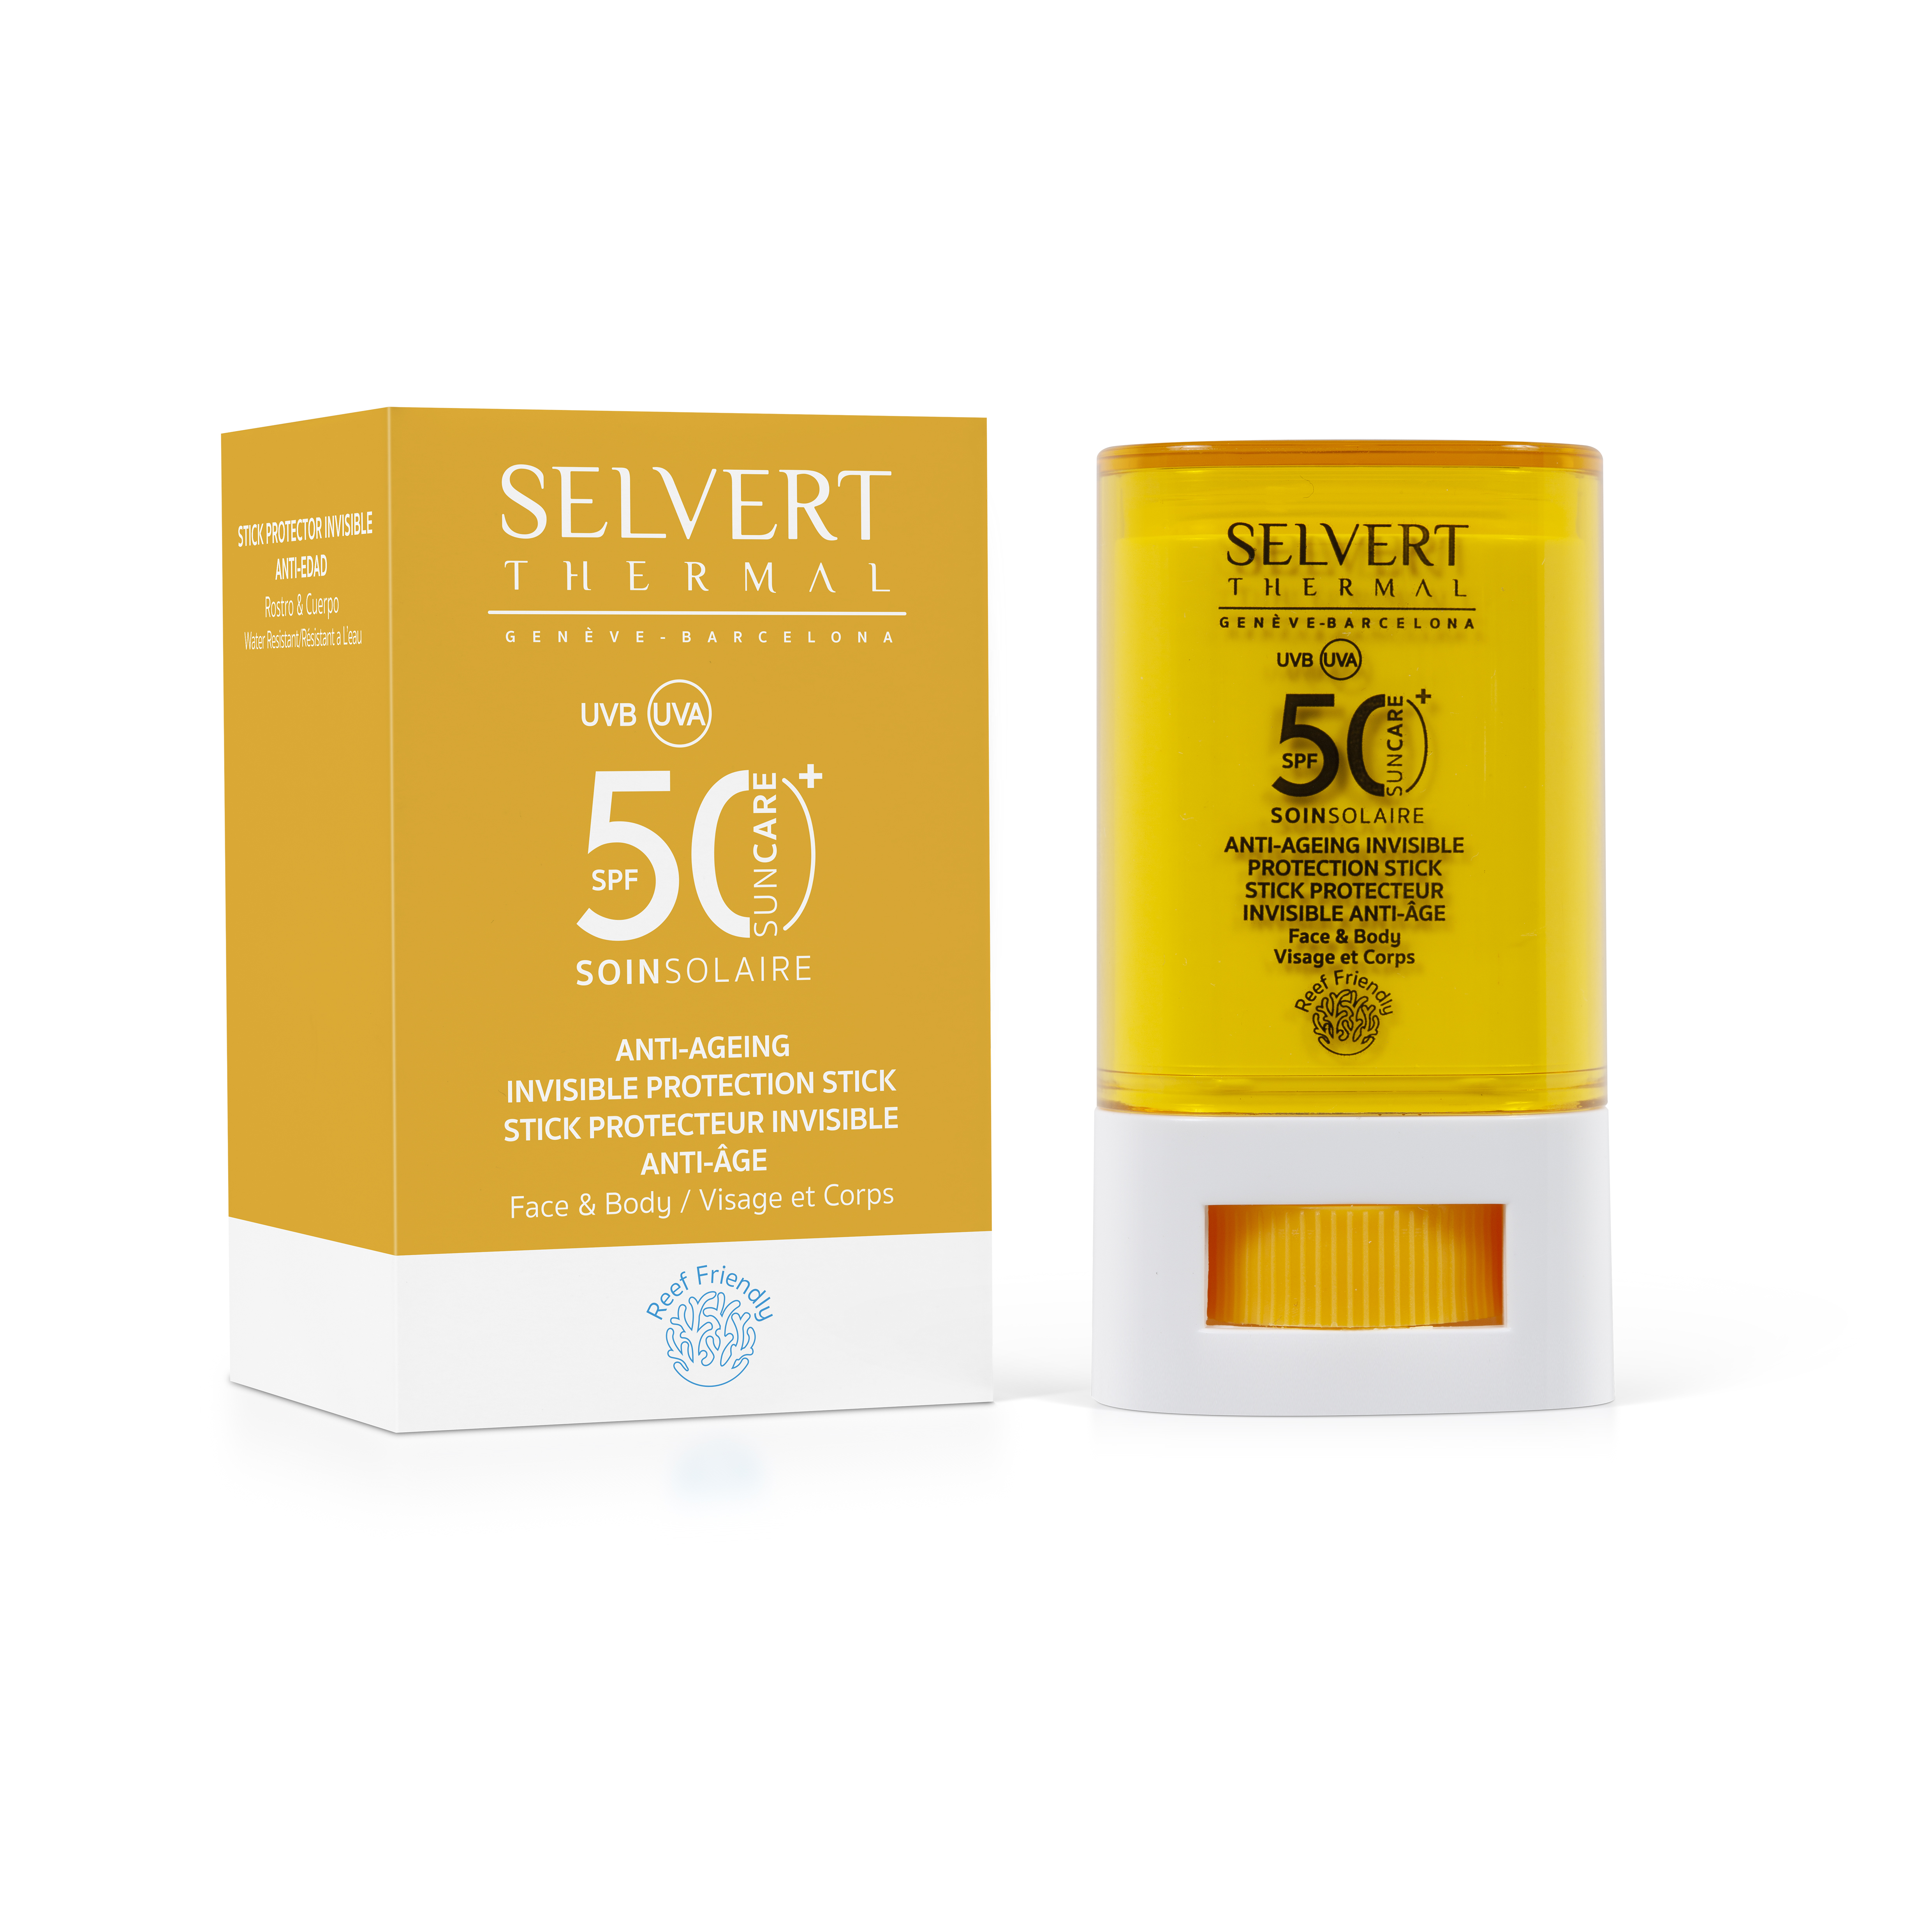 Anti-ageing Invisible Protection Stick. SPF 50+ Anti-ageing Invisible Protection Stick